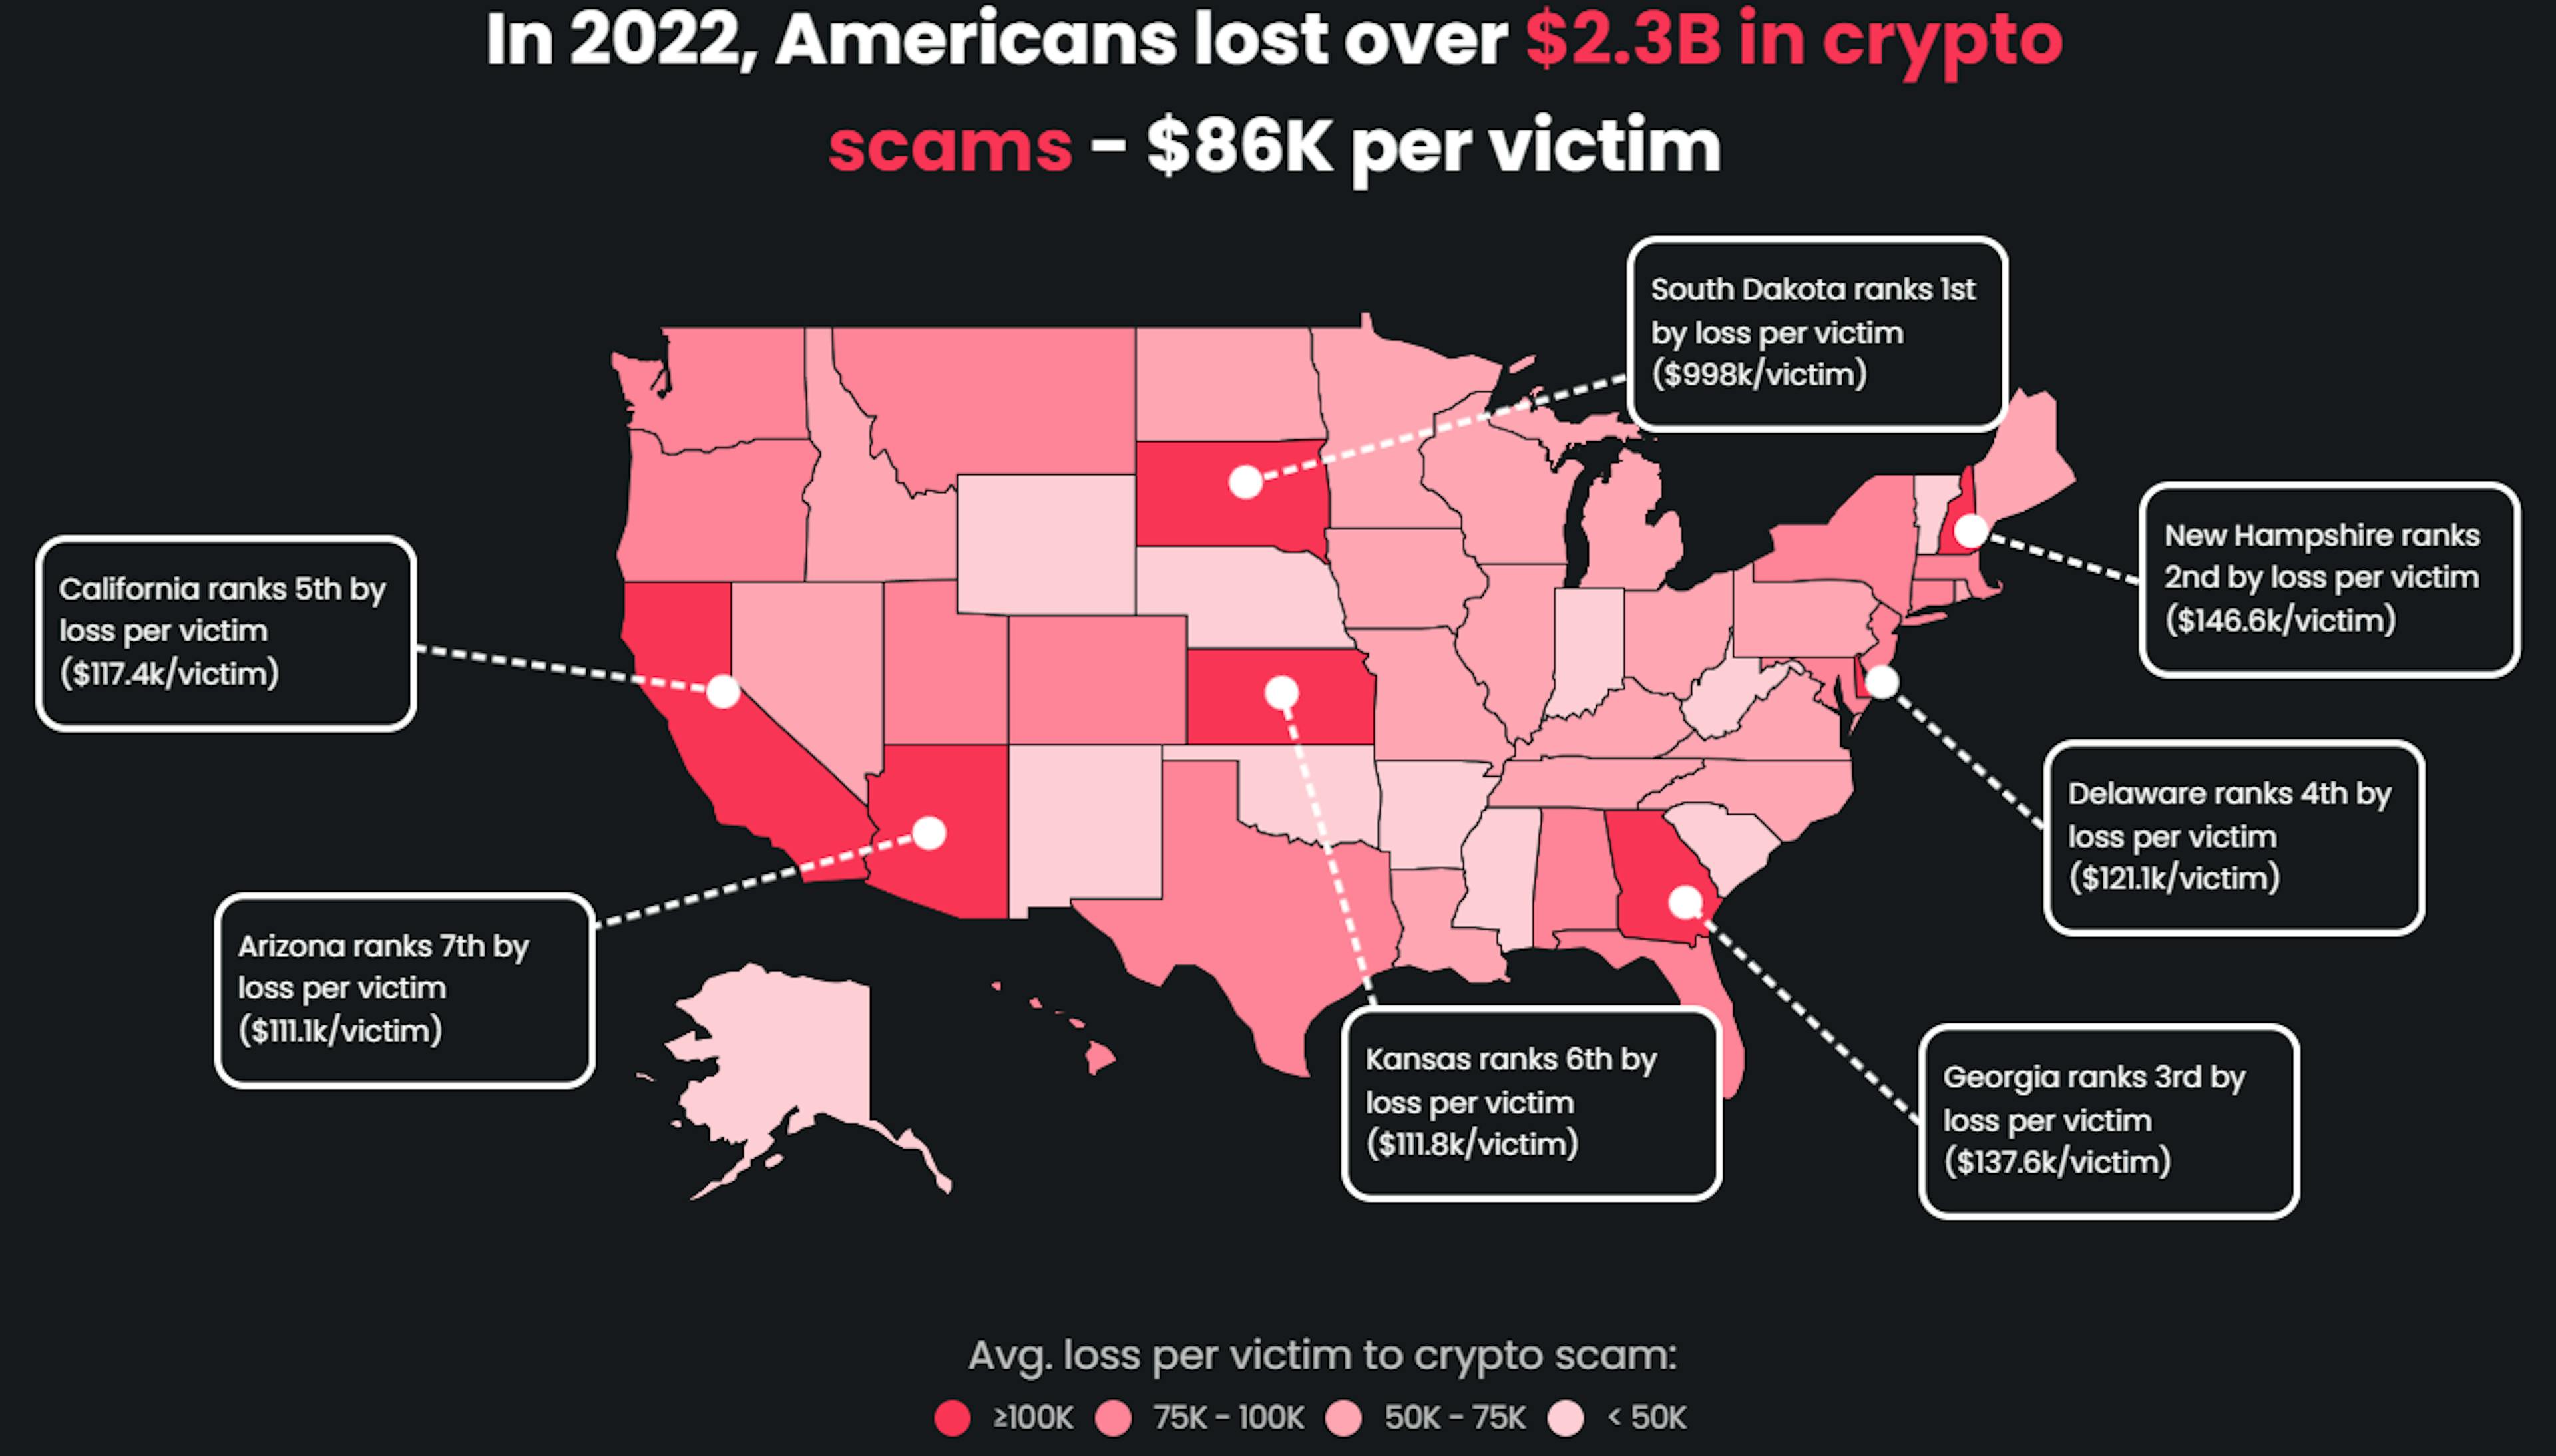 Source :https://surfshark.com/research/chart/us-cryptocurrency-scams